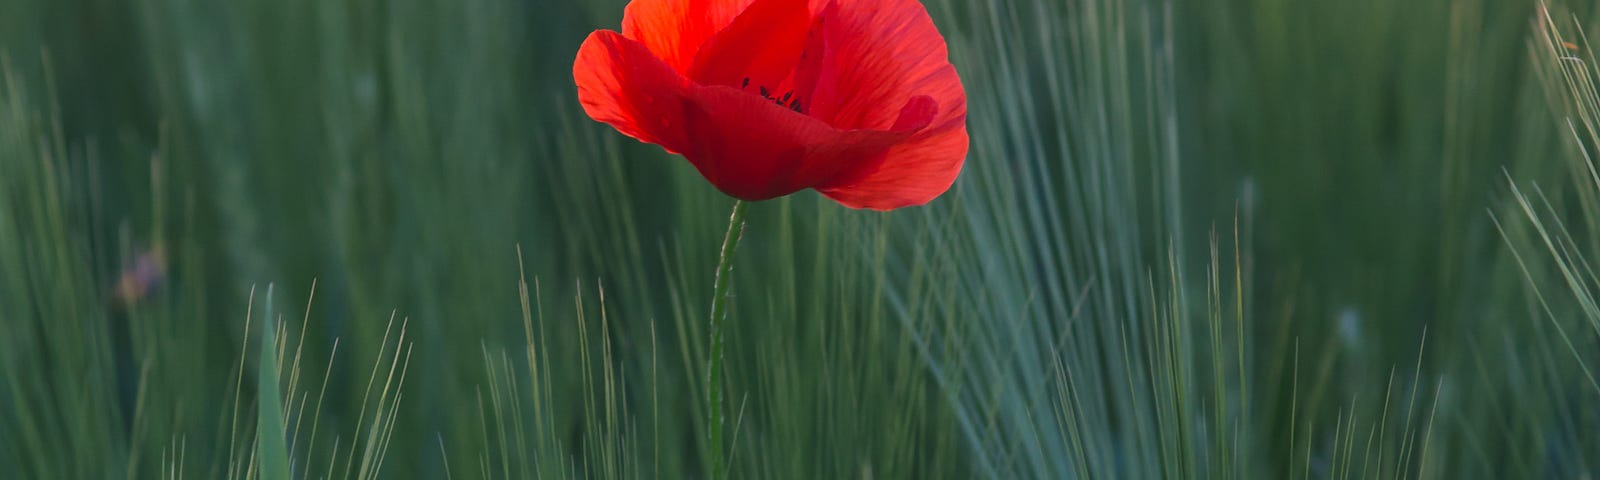 A single red poppy rising above a field of dark green grasses.